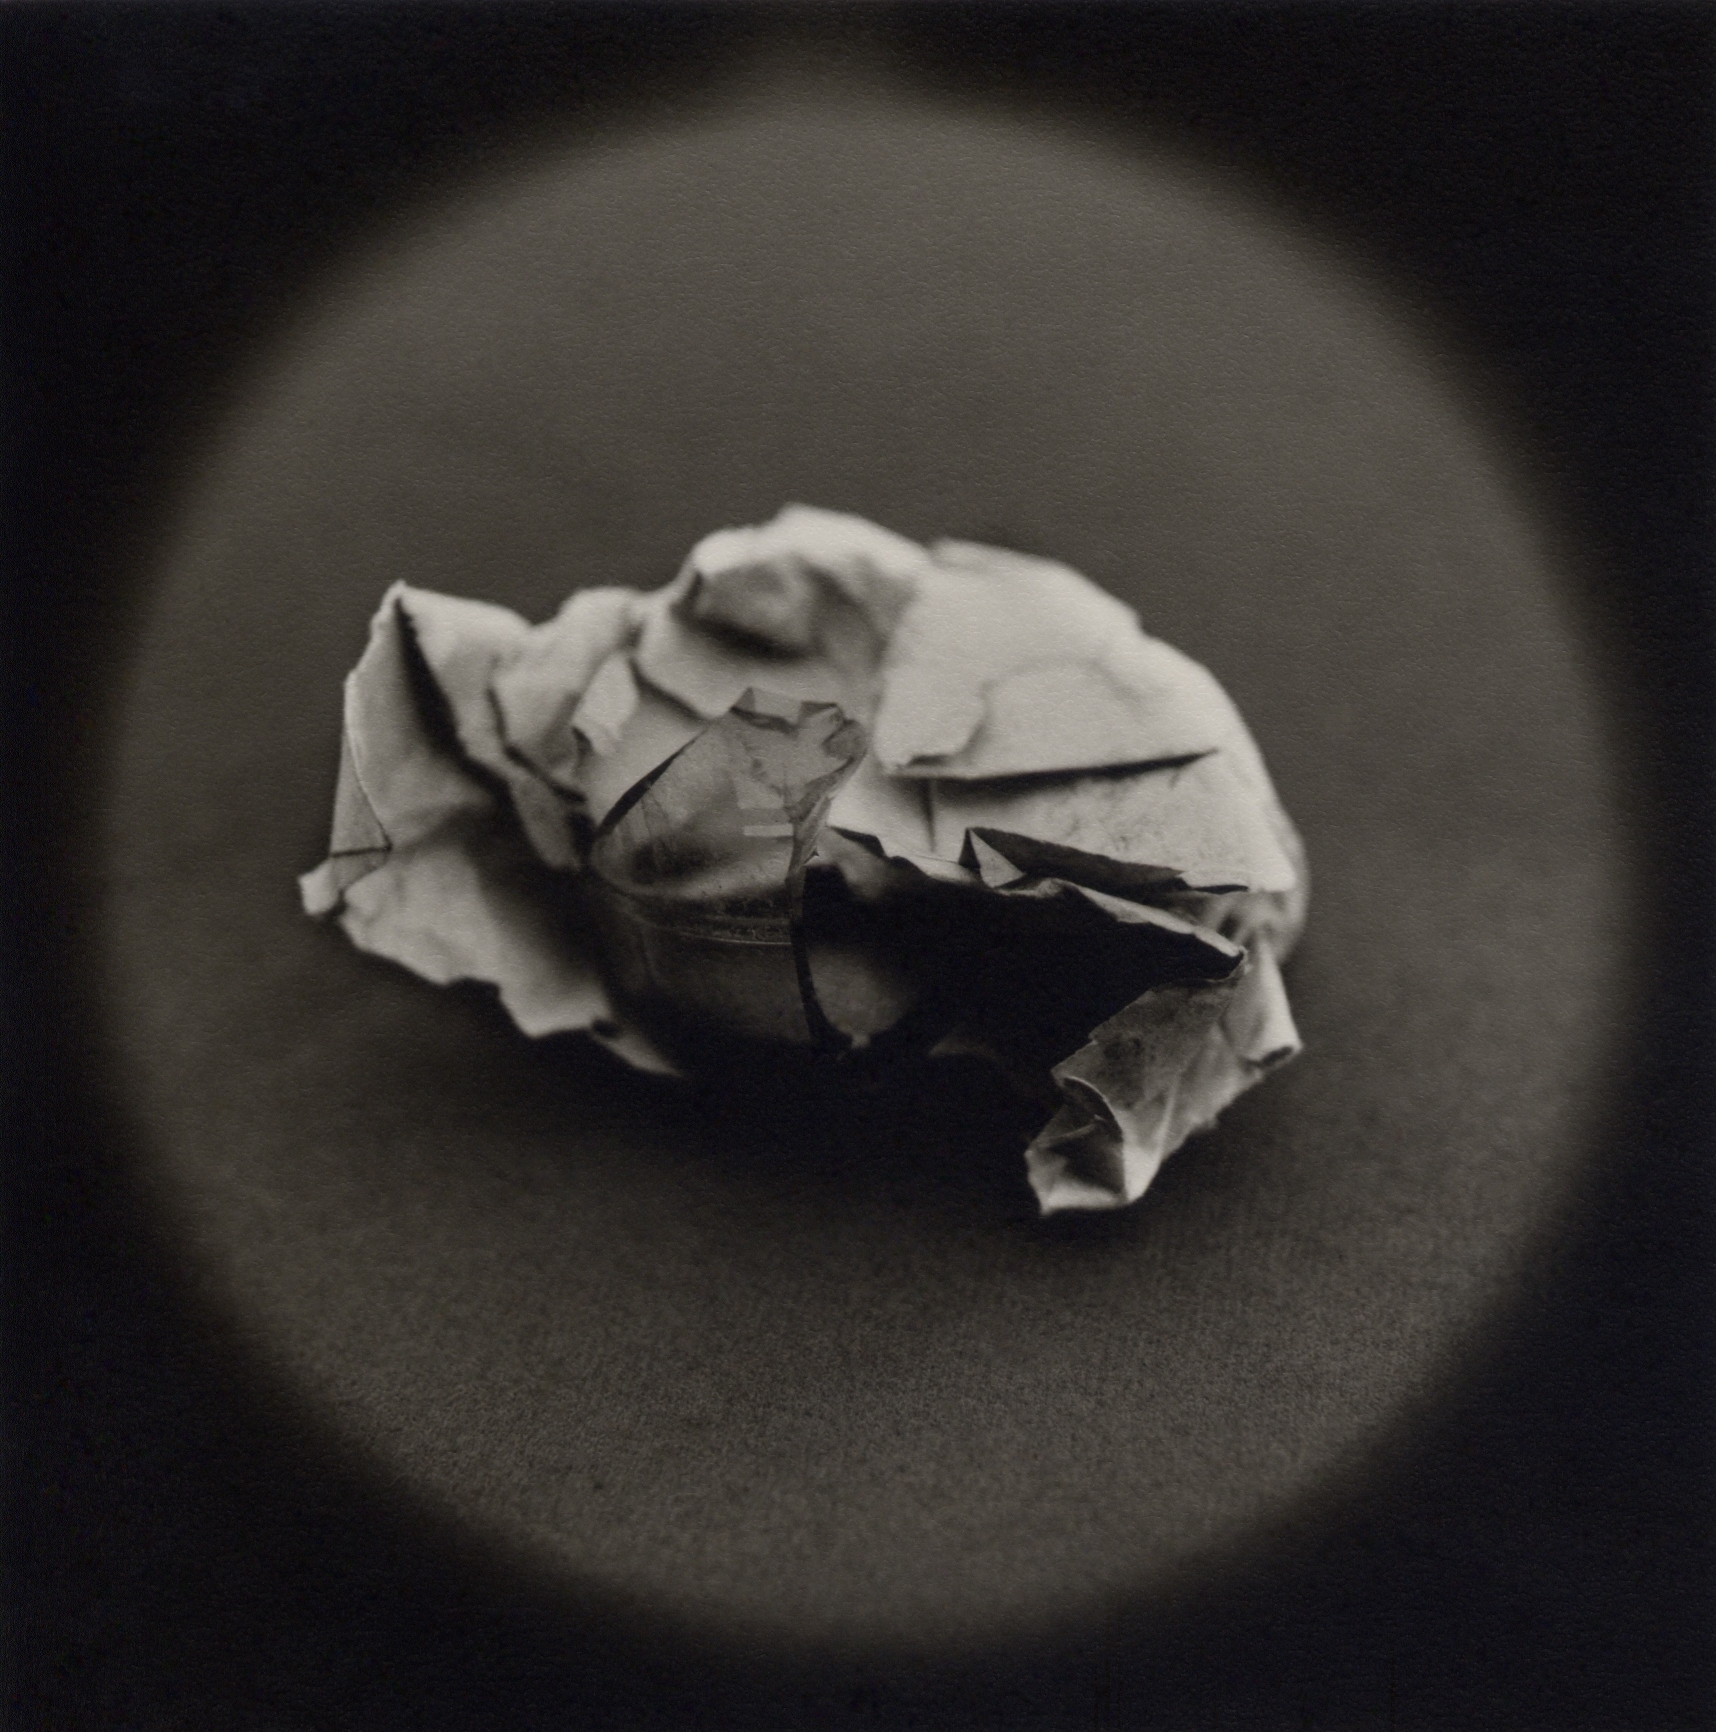   Rudimentary weapon made from broken bottle and paper   Toned gelatin silver print.   16 x 16 in. (40 x 40 cm.) 